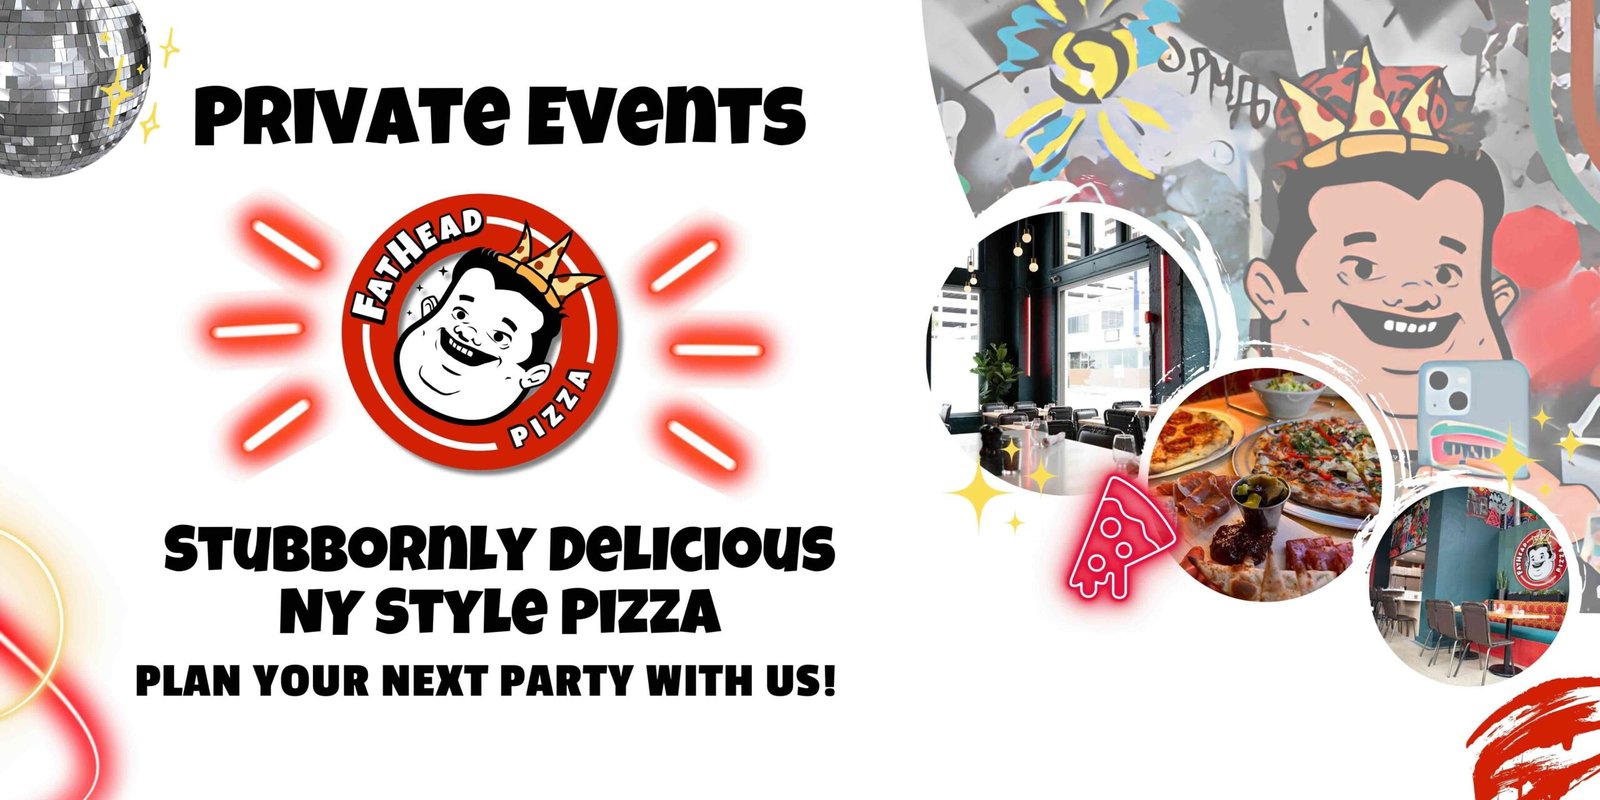 Promo Web Banners - Private Events